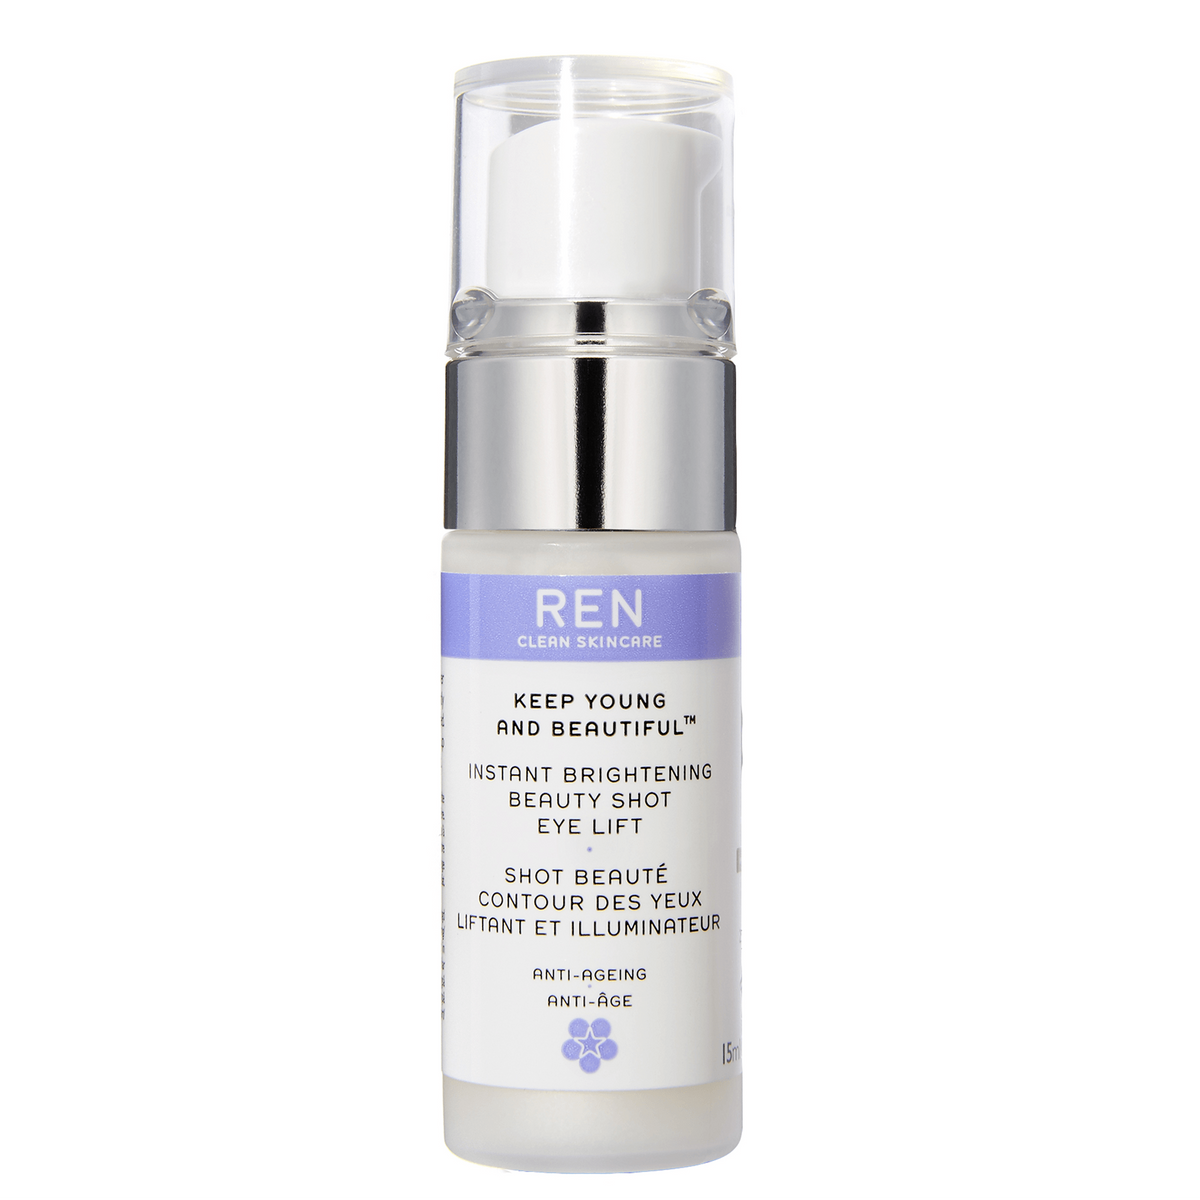 REN Clean Skincare Keep Young And Beautiful™ Instant Brightening Beauty Shot Eye Lift at Socialite Beauty Canada